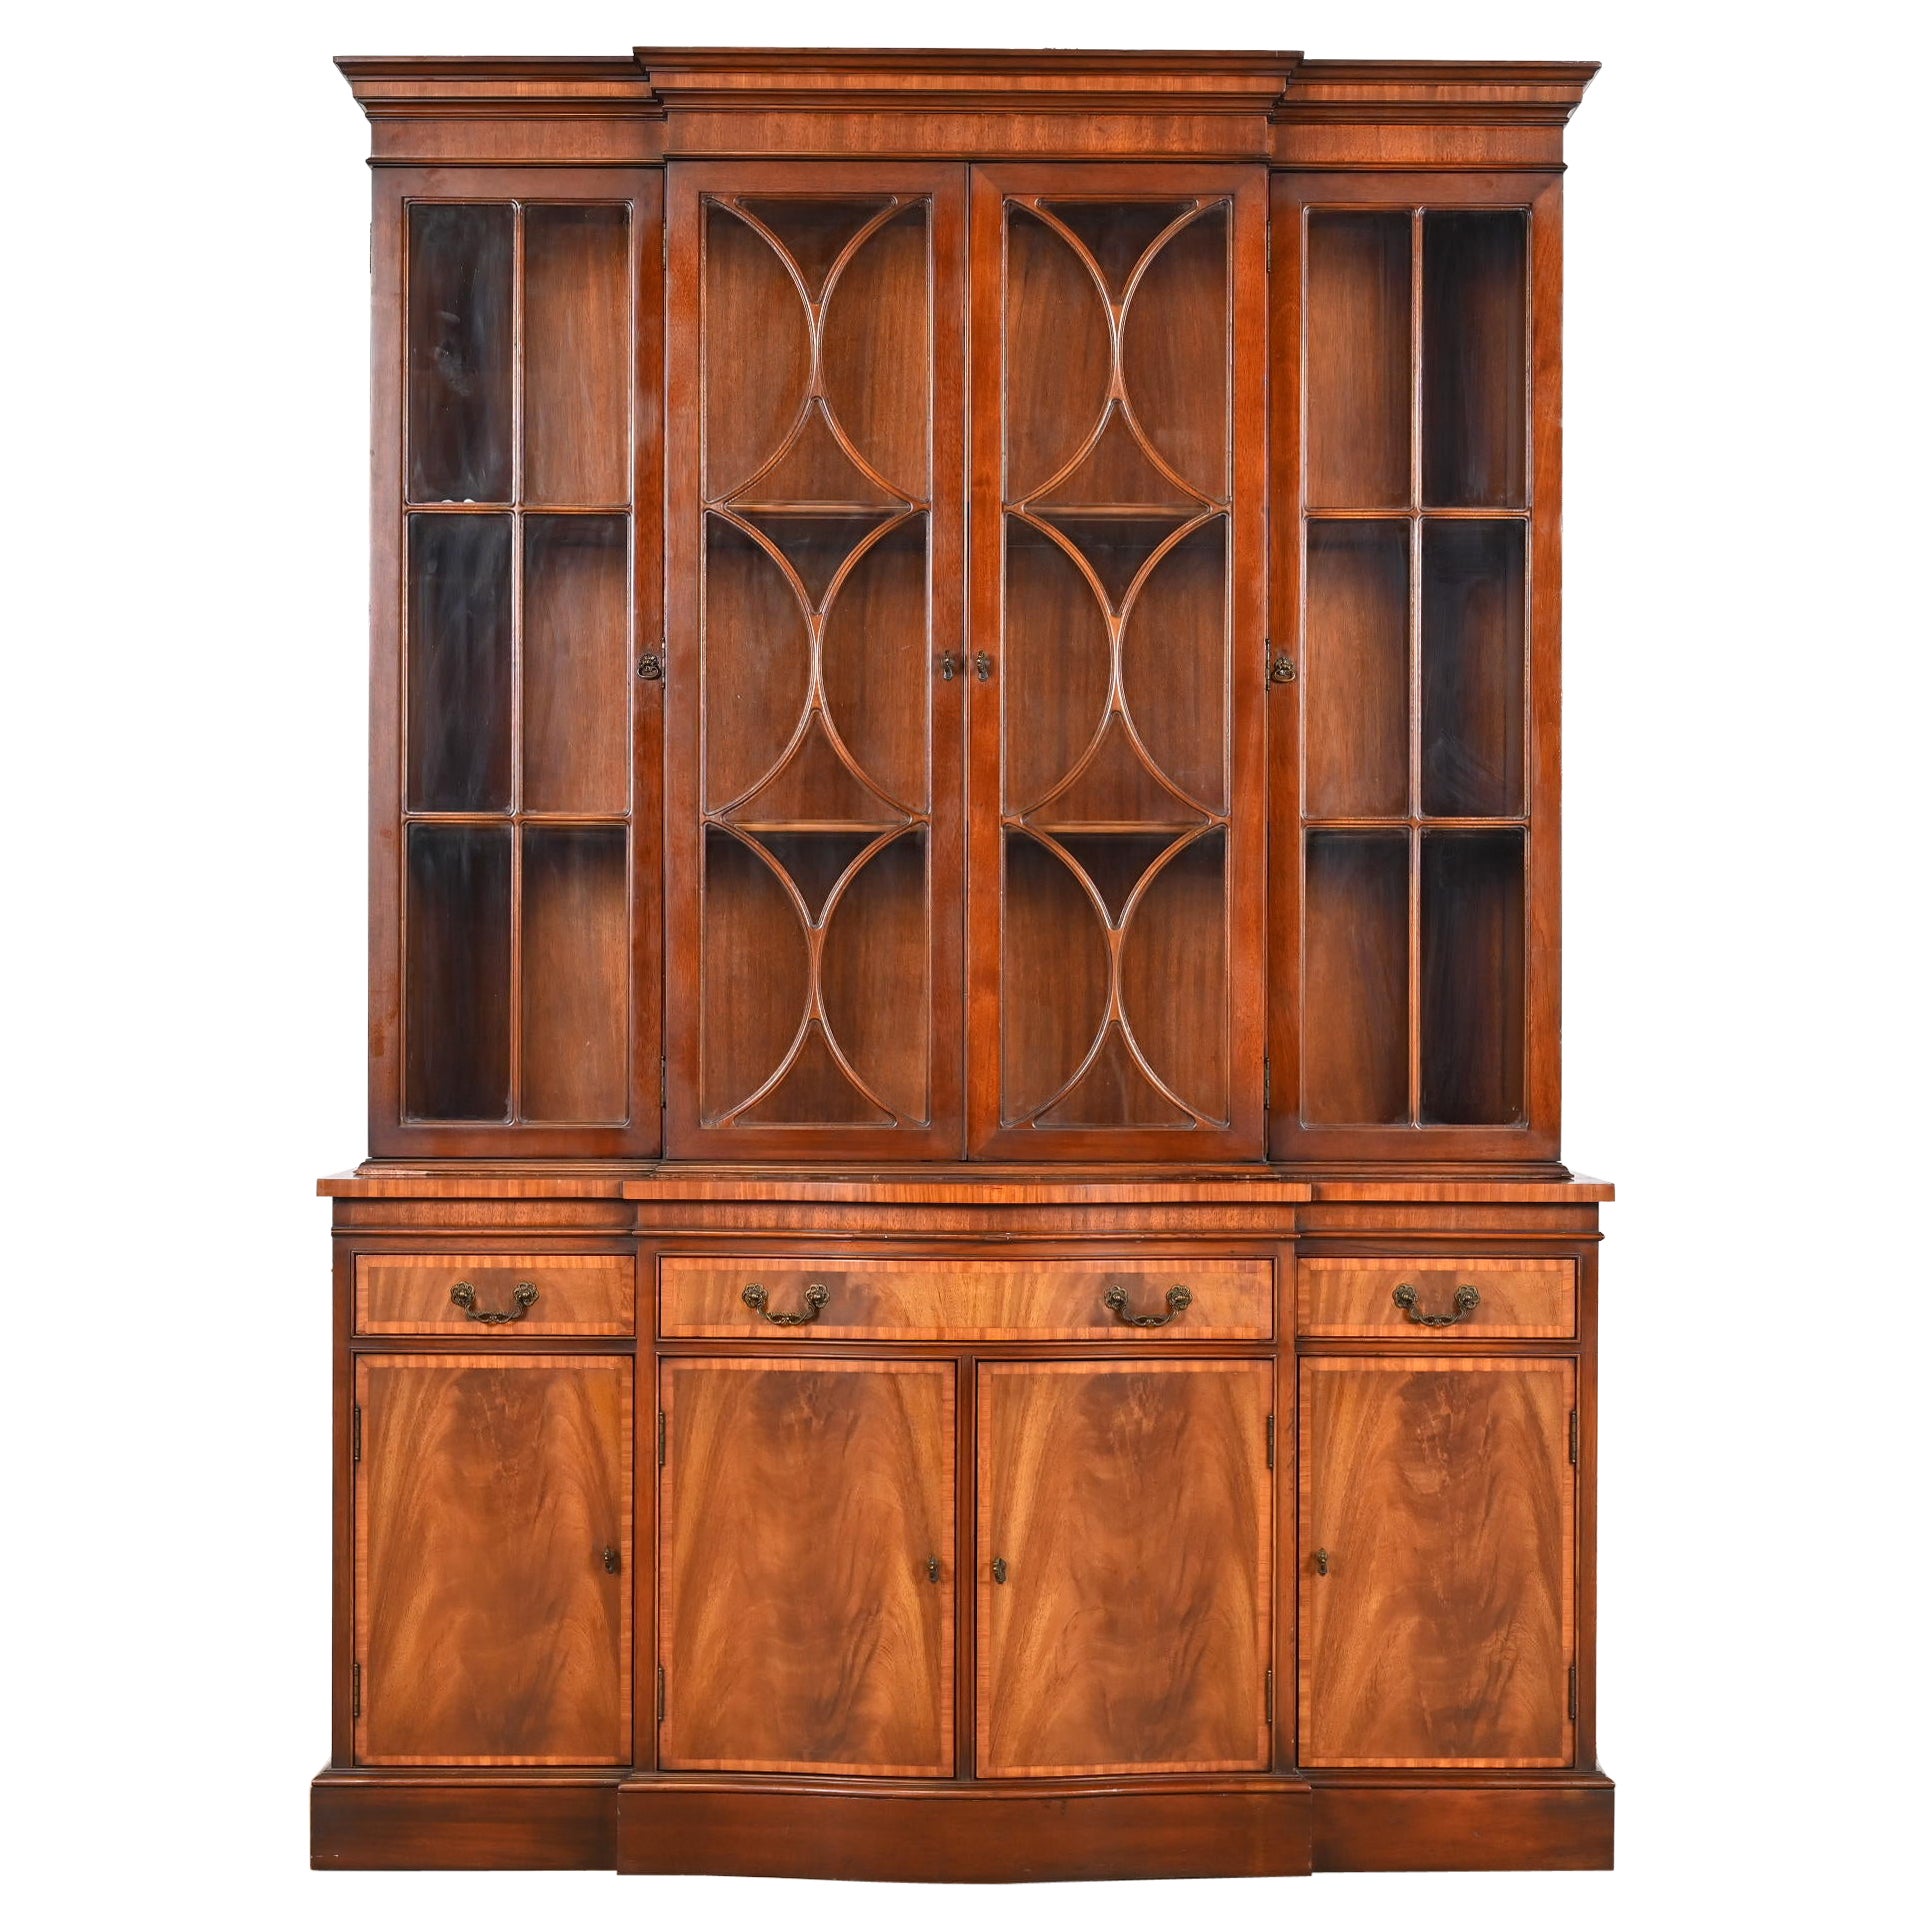 Georgian Carved Flame Mahogany Breakfront Bookcase Cabinet by Fancher, 1940s For Sale